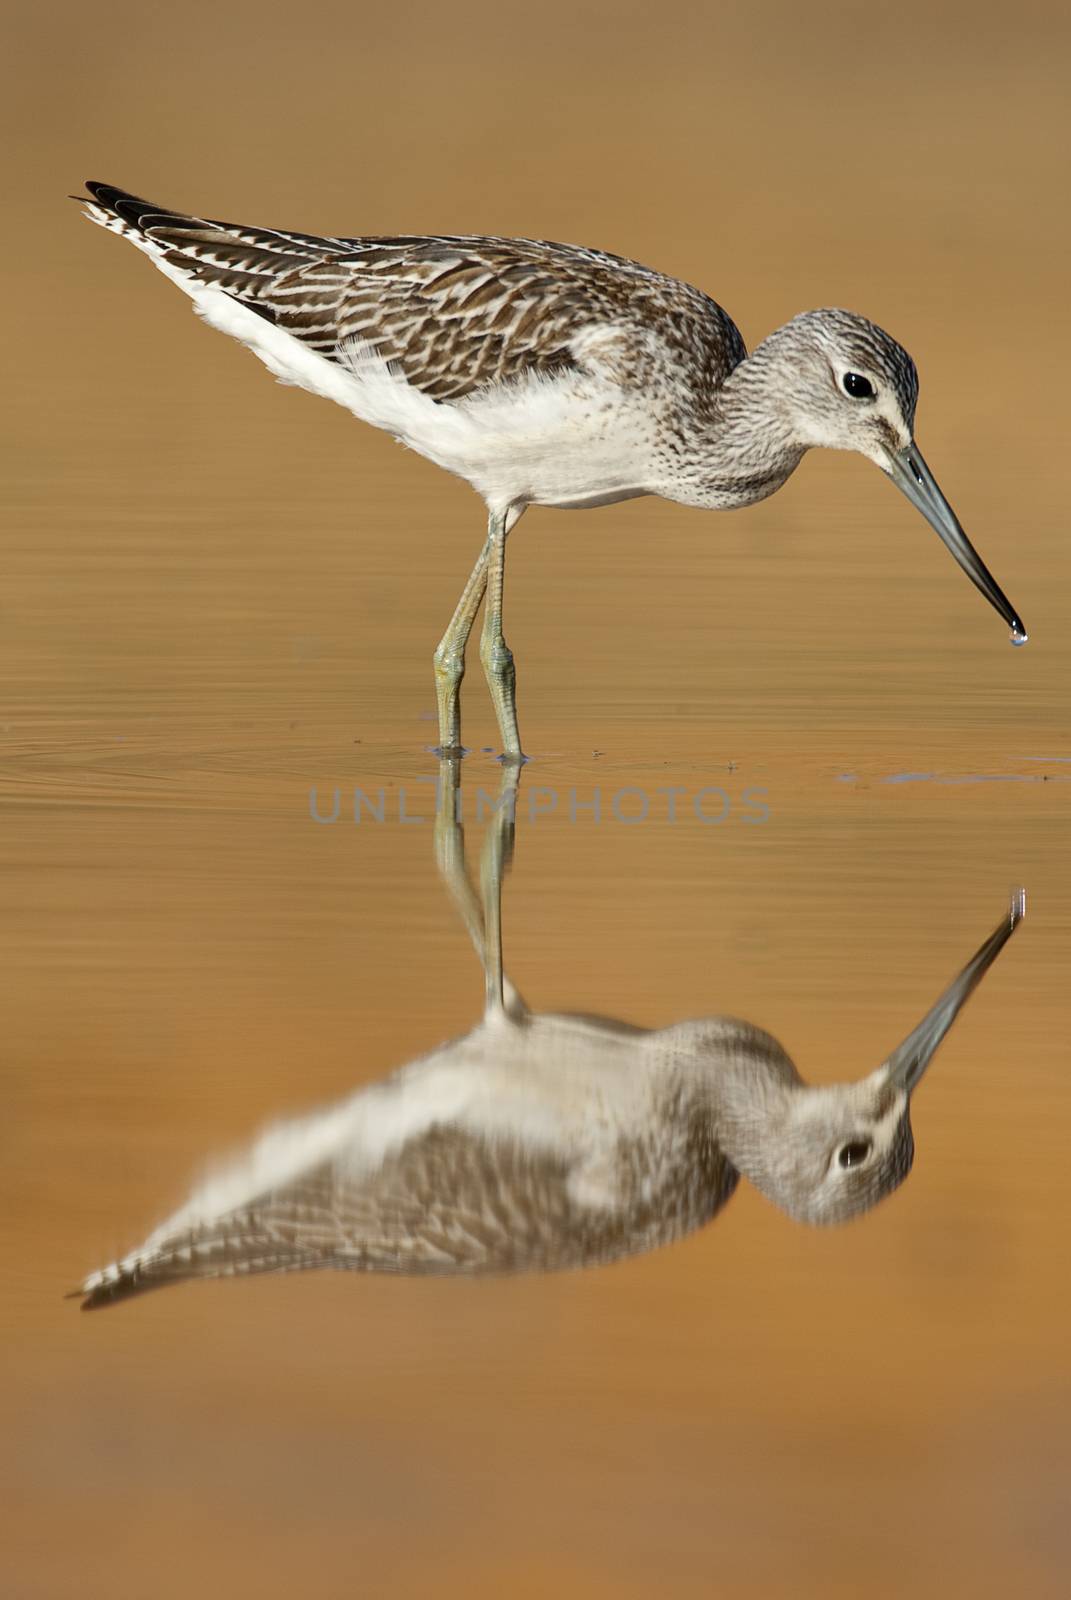 Common Greenshank, Tringa nebularia, Looking for food in the wat by jalonsohu@gmail.com